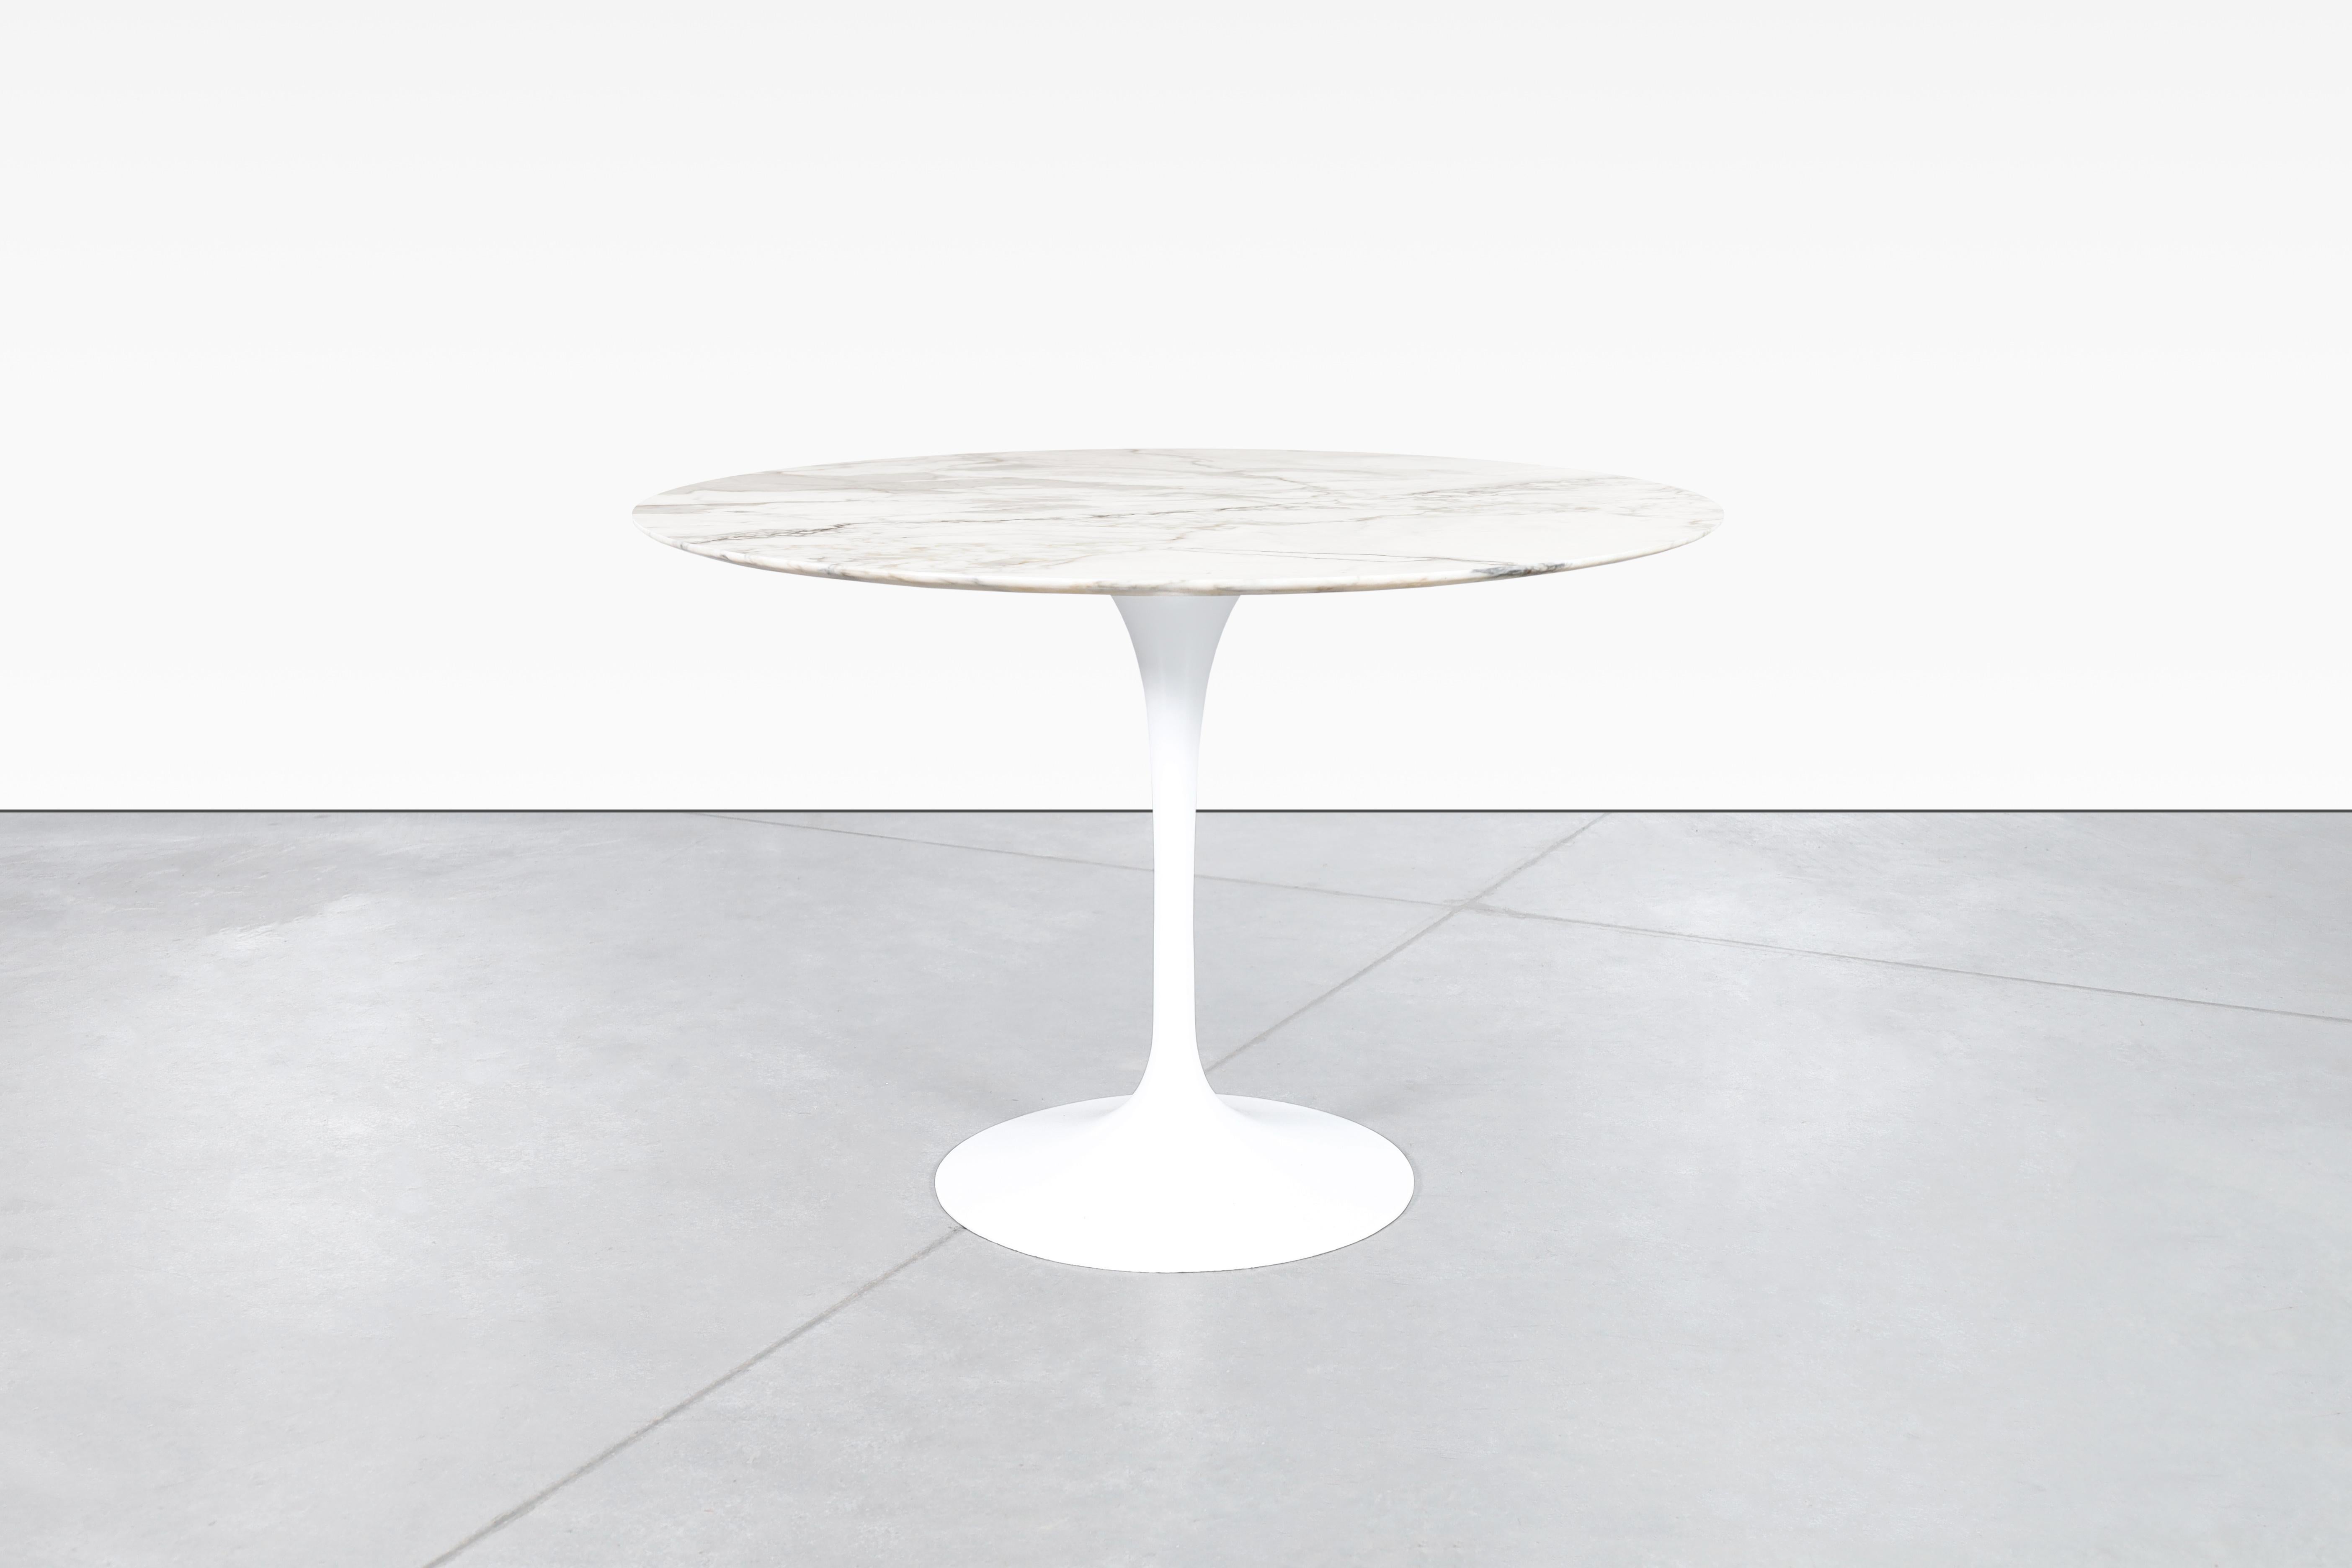 The Tulip Table by Eero Saarinen for Knoll is a timeless piece of furniture that will never go out of style. This early design features a stunning Calacatta marble top that rests atop an elegant aluminum base. The table's unique design allows it to